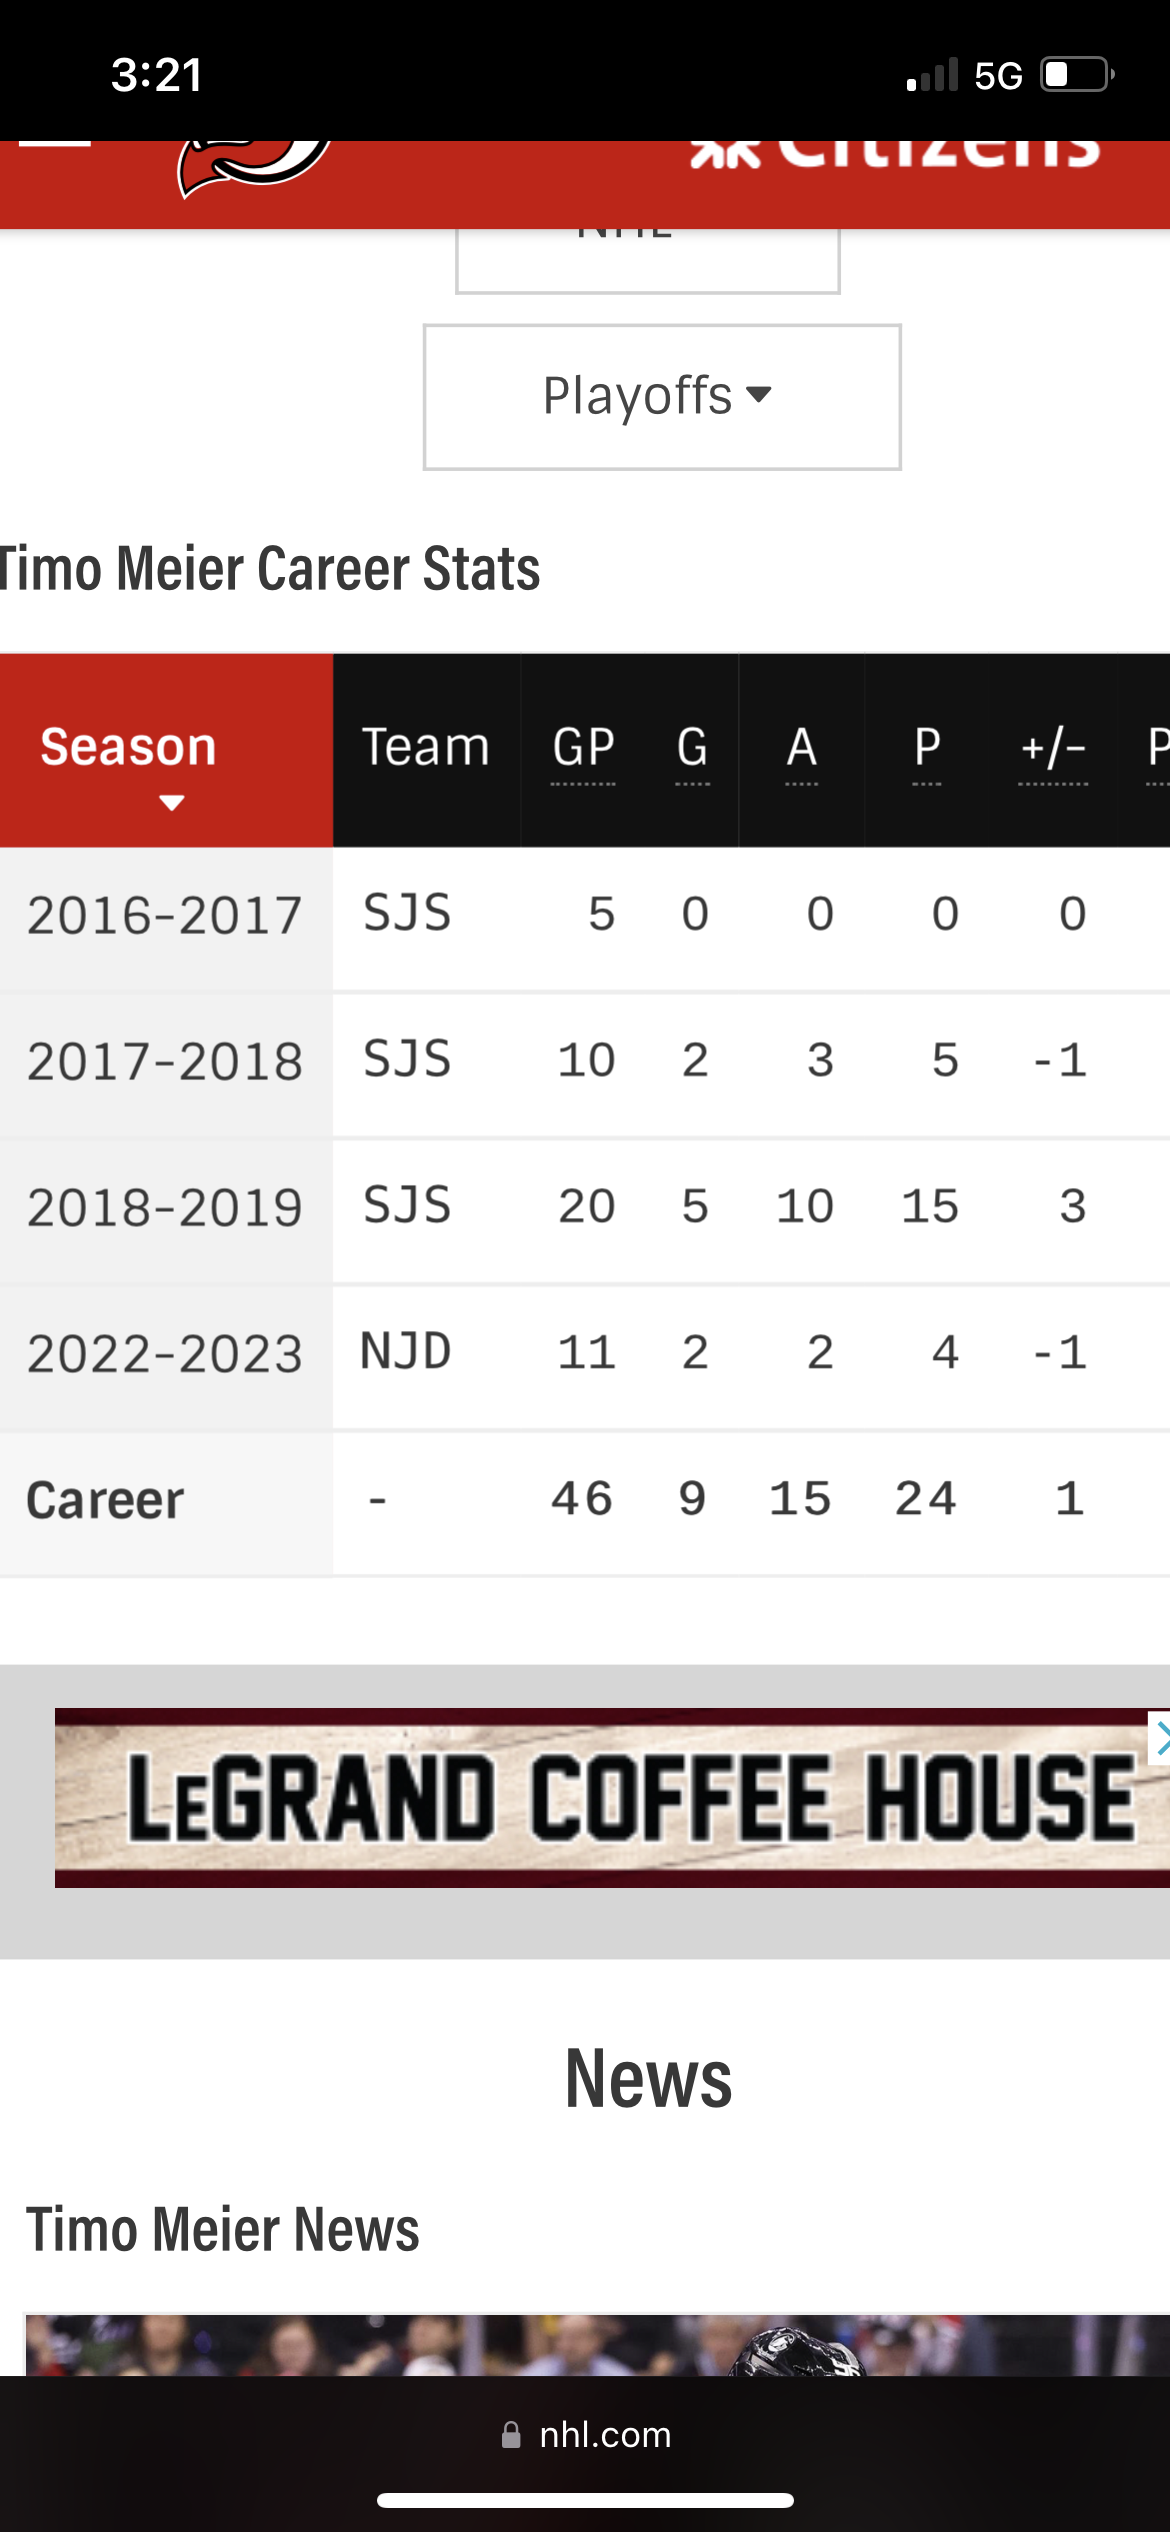 For fans wanting an inside look at NHL salaries, CapFriendly and PuckPedia  are great resources - The Boston Globe